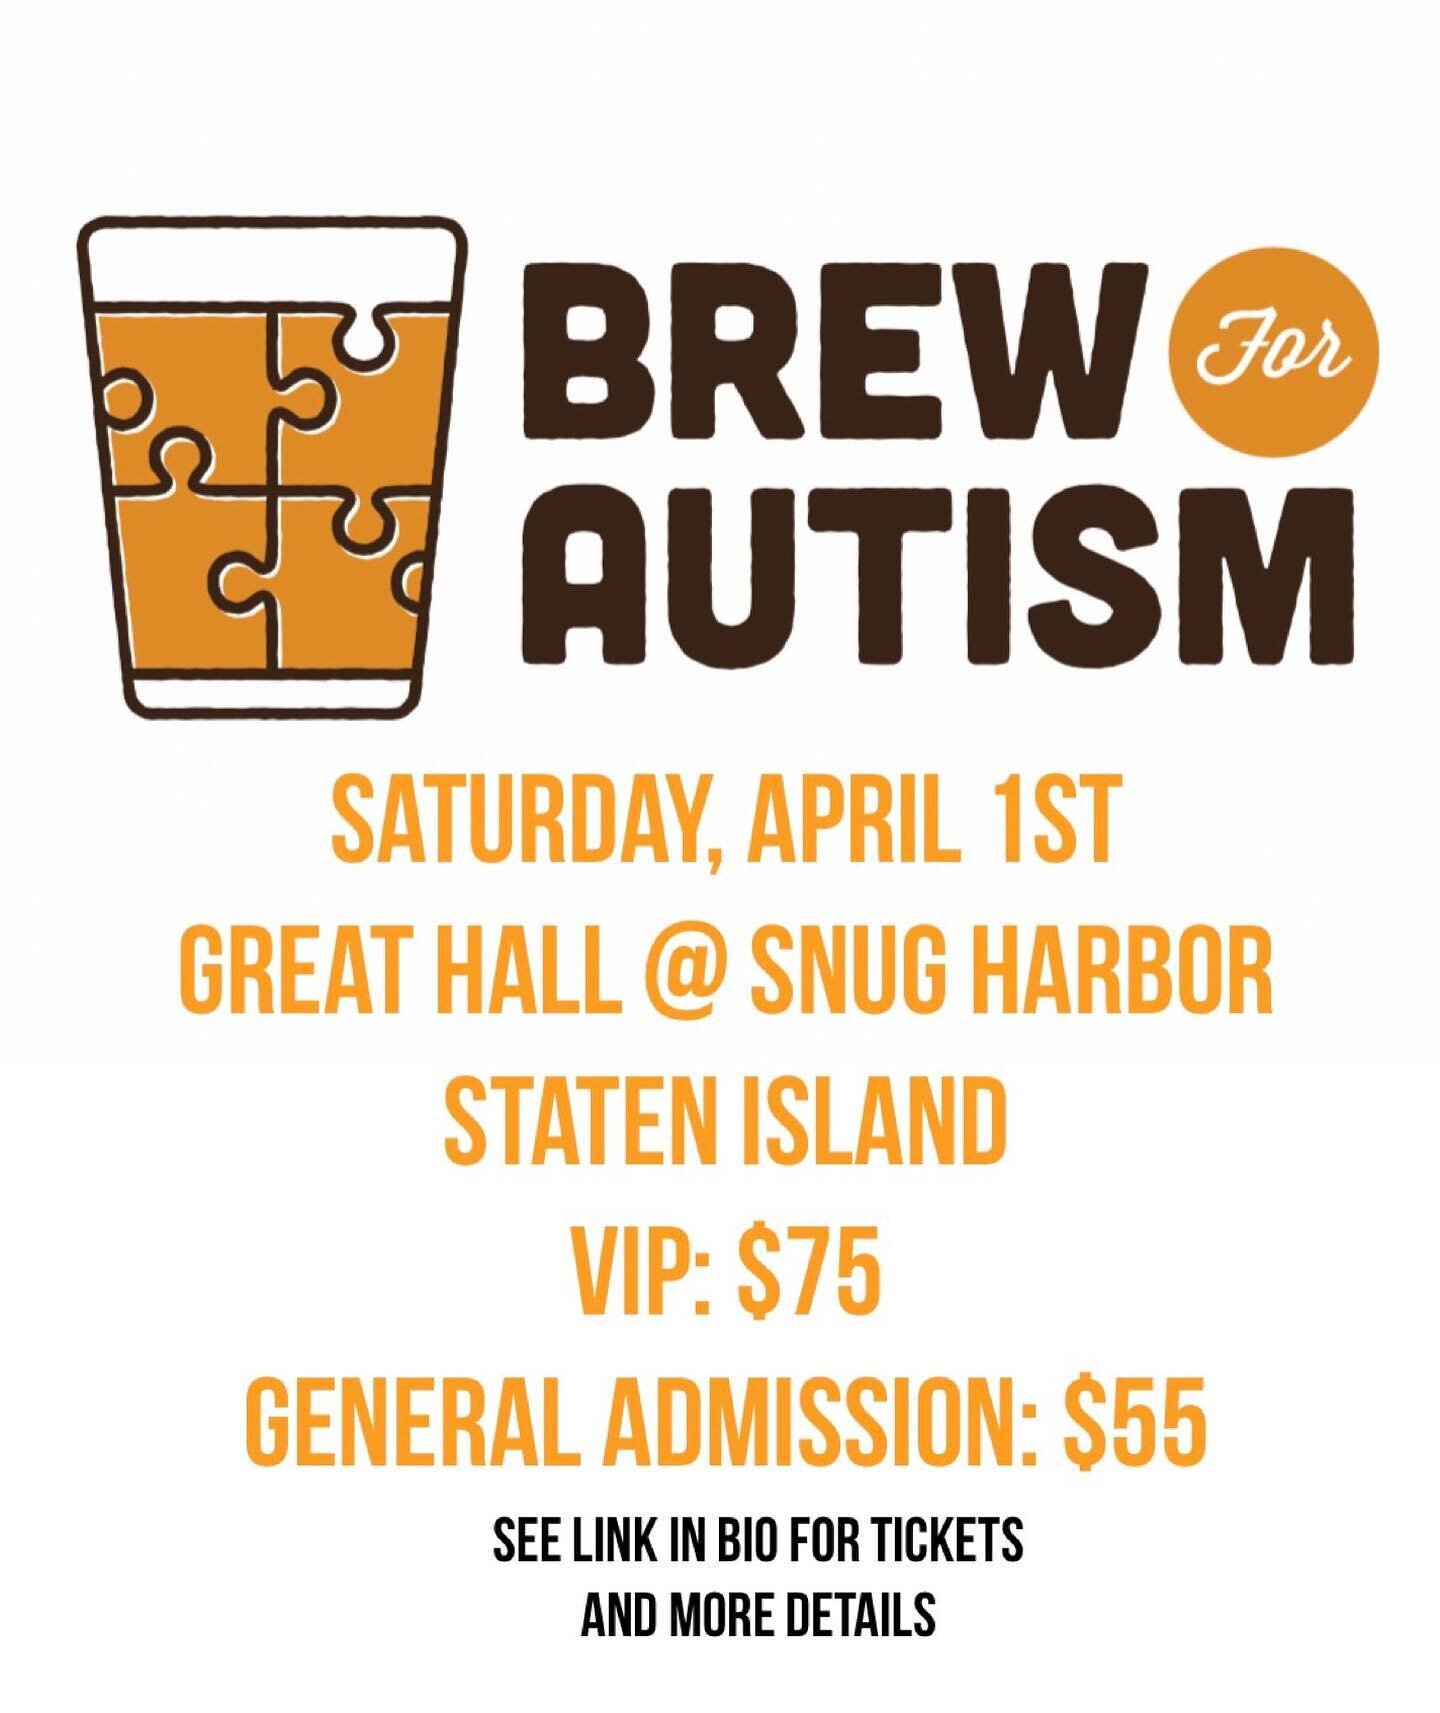 Brew for Autism is this Saturday! Come and enjoy unlimited samples of over 40 different beers, ciders and more! There will also be music, food from local restaurants, and raffles! All proceeds benefit local Autism charities.